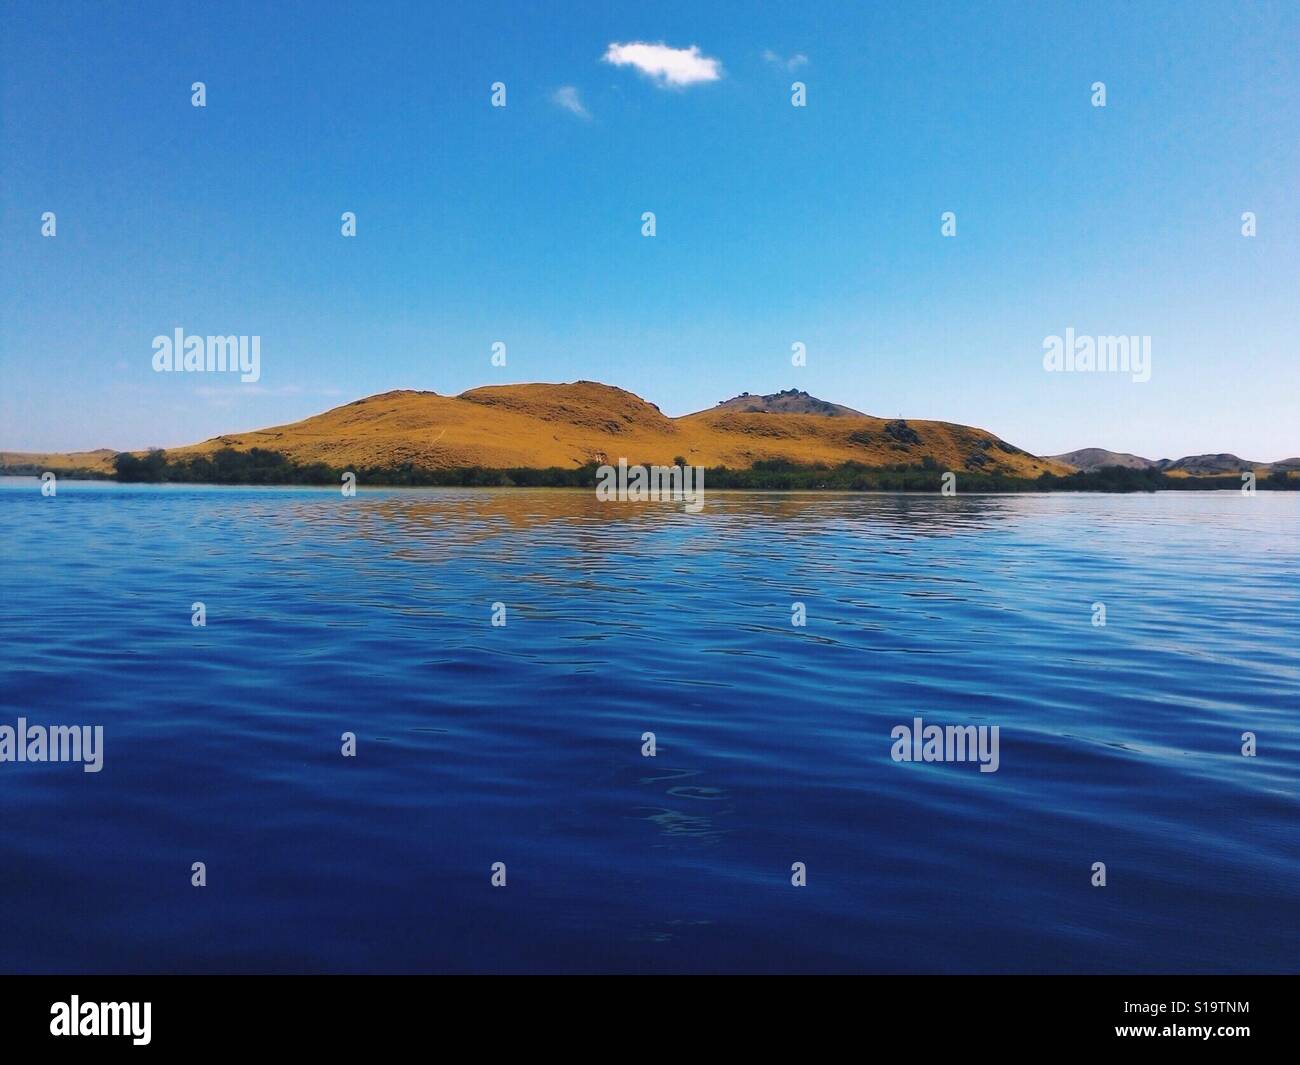 Komodo Islands view From The Sea Stock Photo